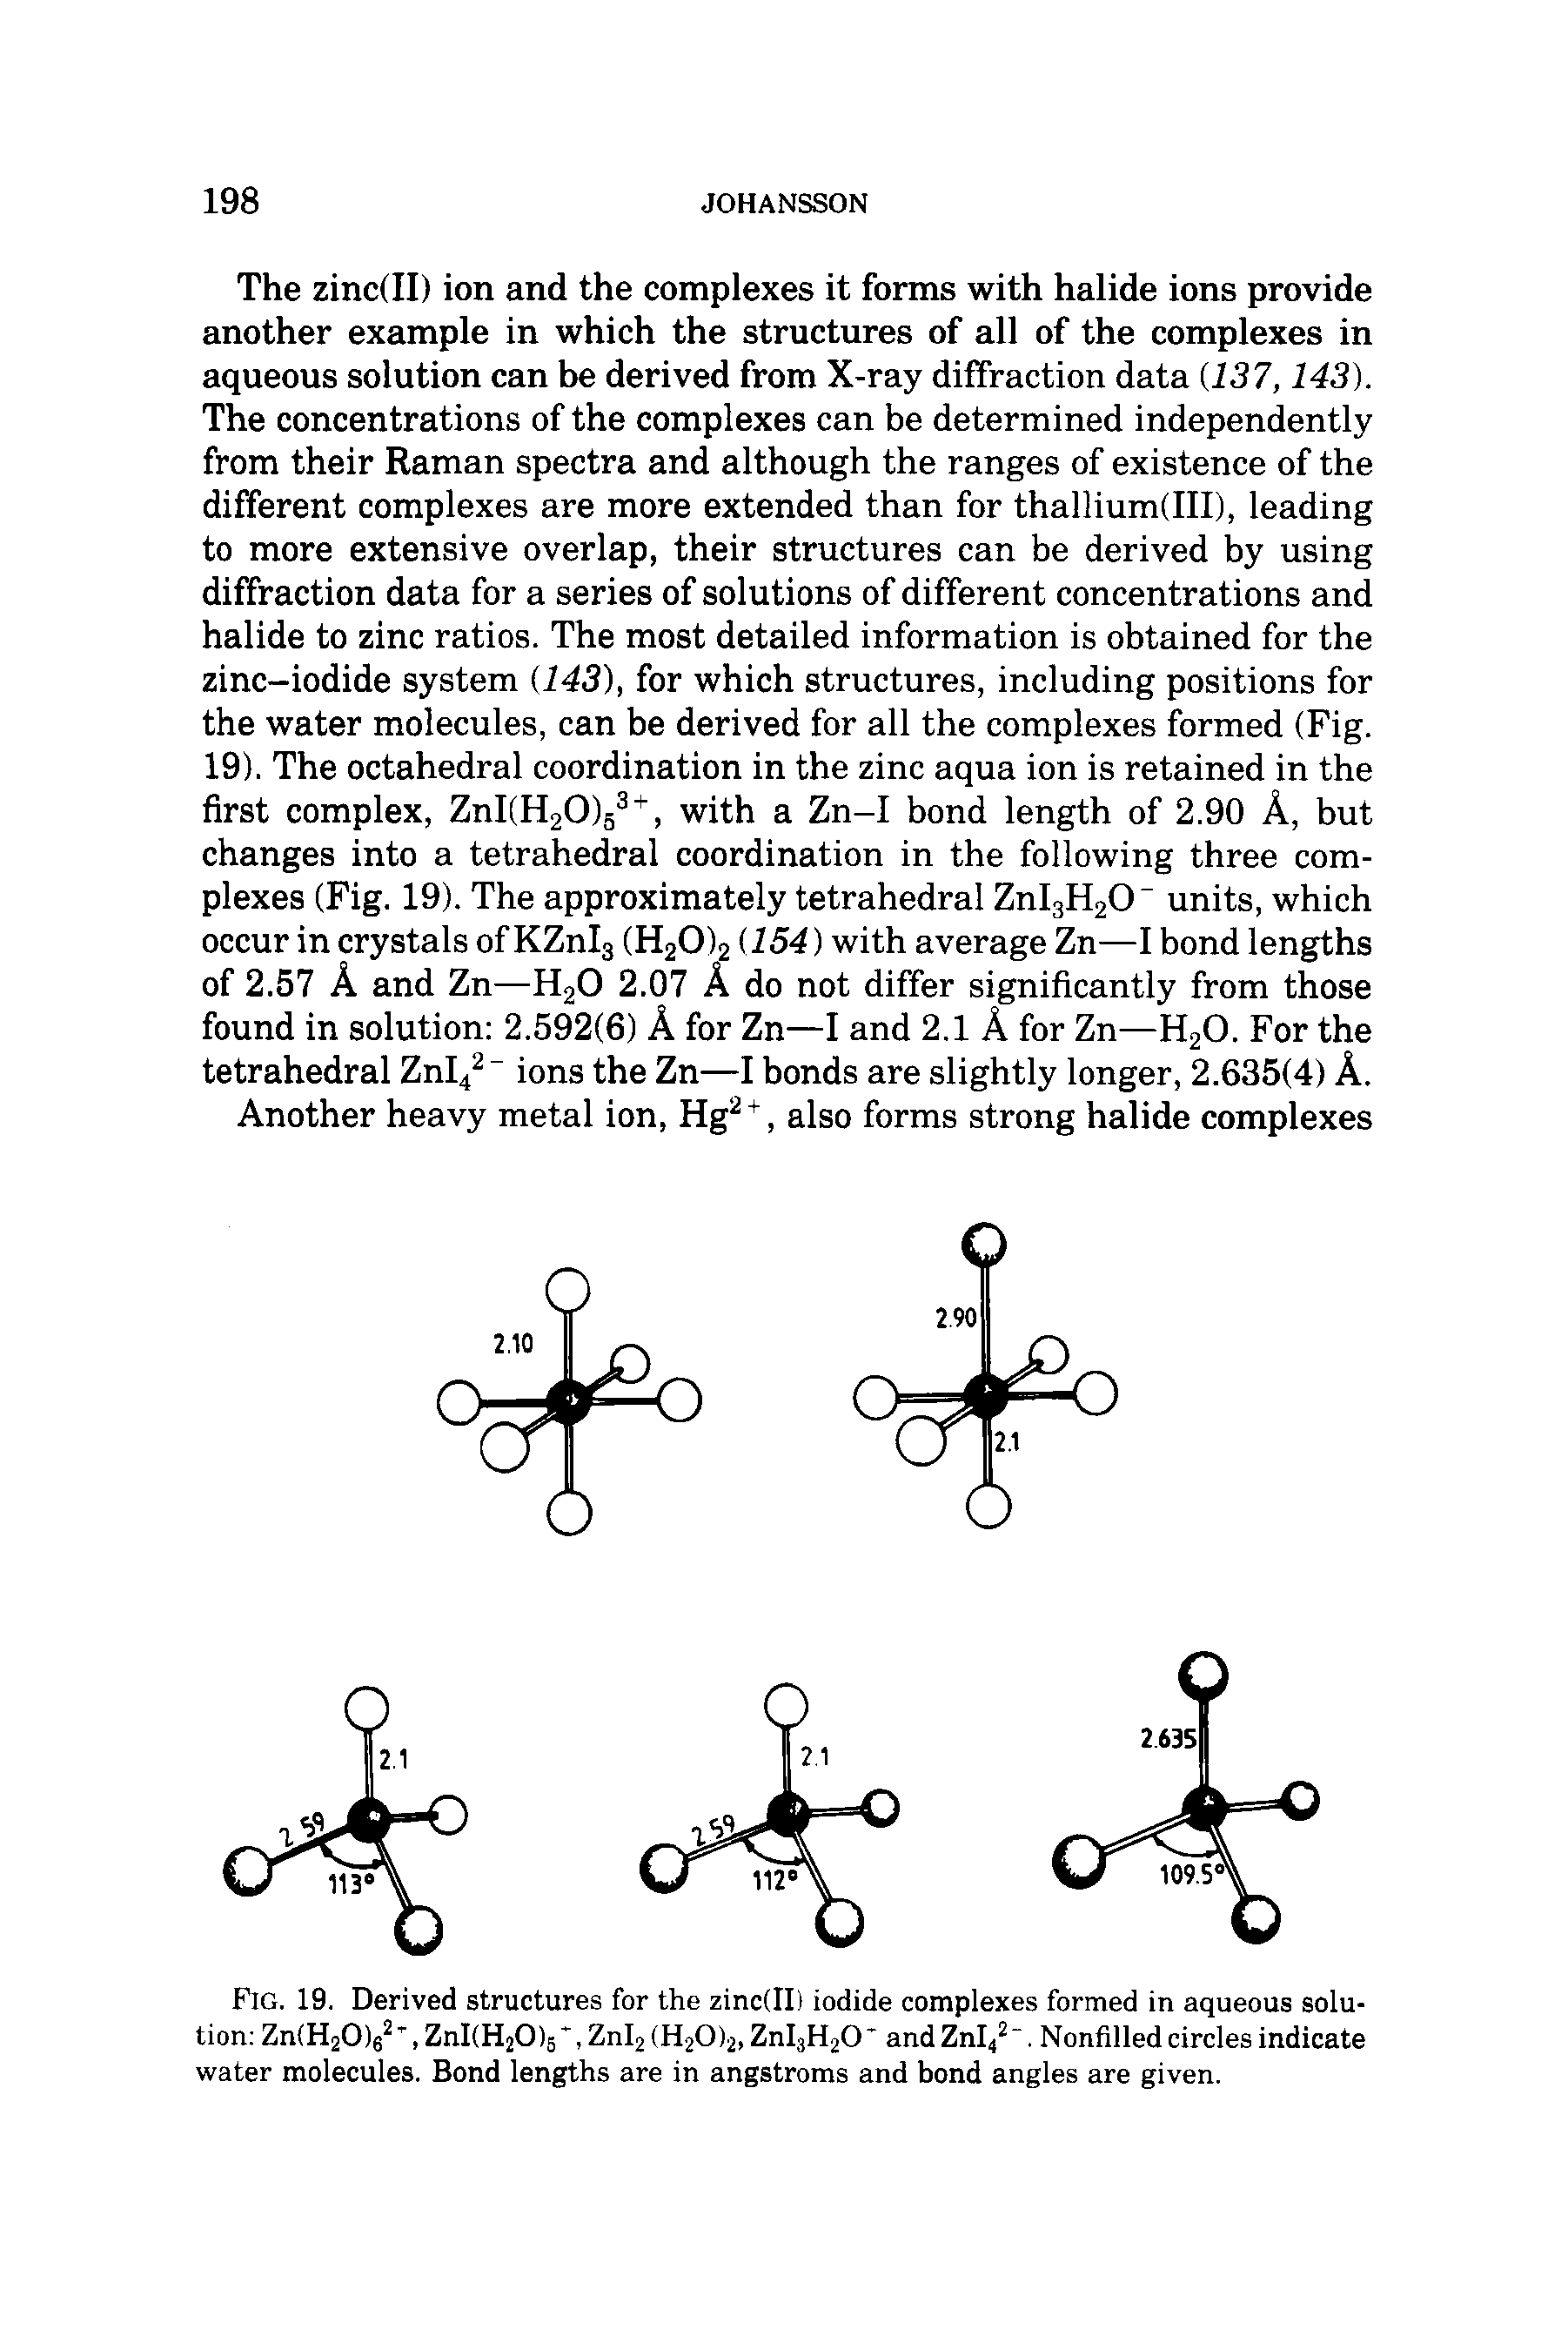 Fig. 19. Derived structures for the zinc(II) iodide complexes formed in aqueous solution Zn(H20)62T, ZnI(H20)5, ZnI2 (H20)2, ZnI3H20 andZnI42 . Nonfilled circles indicate water molecules. Bond lengths are in angstroms and bond angles are given.